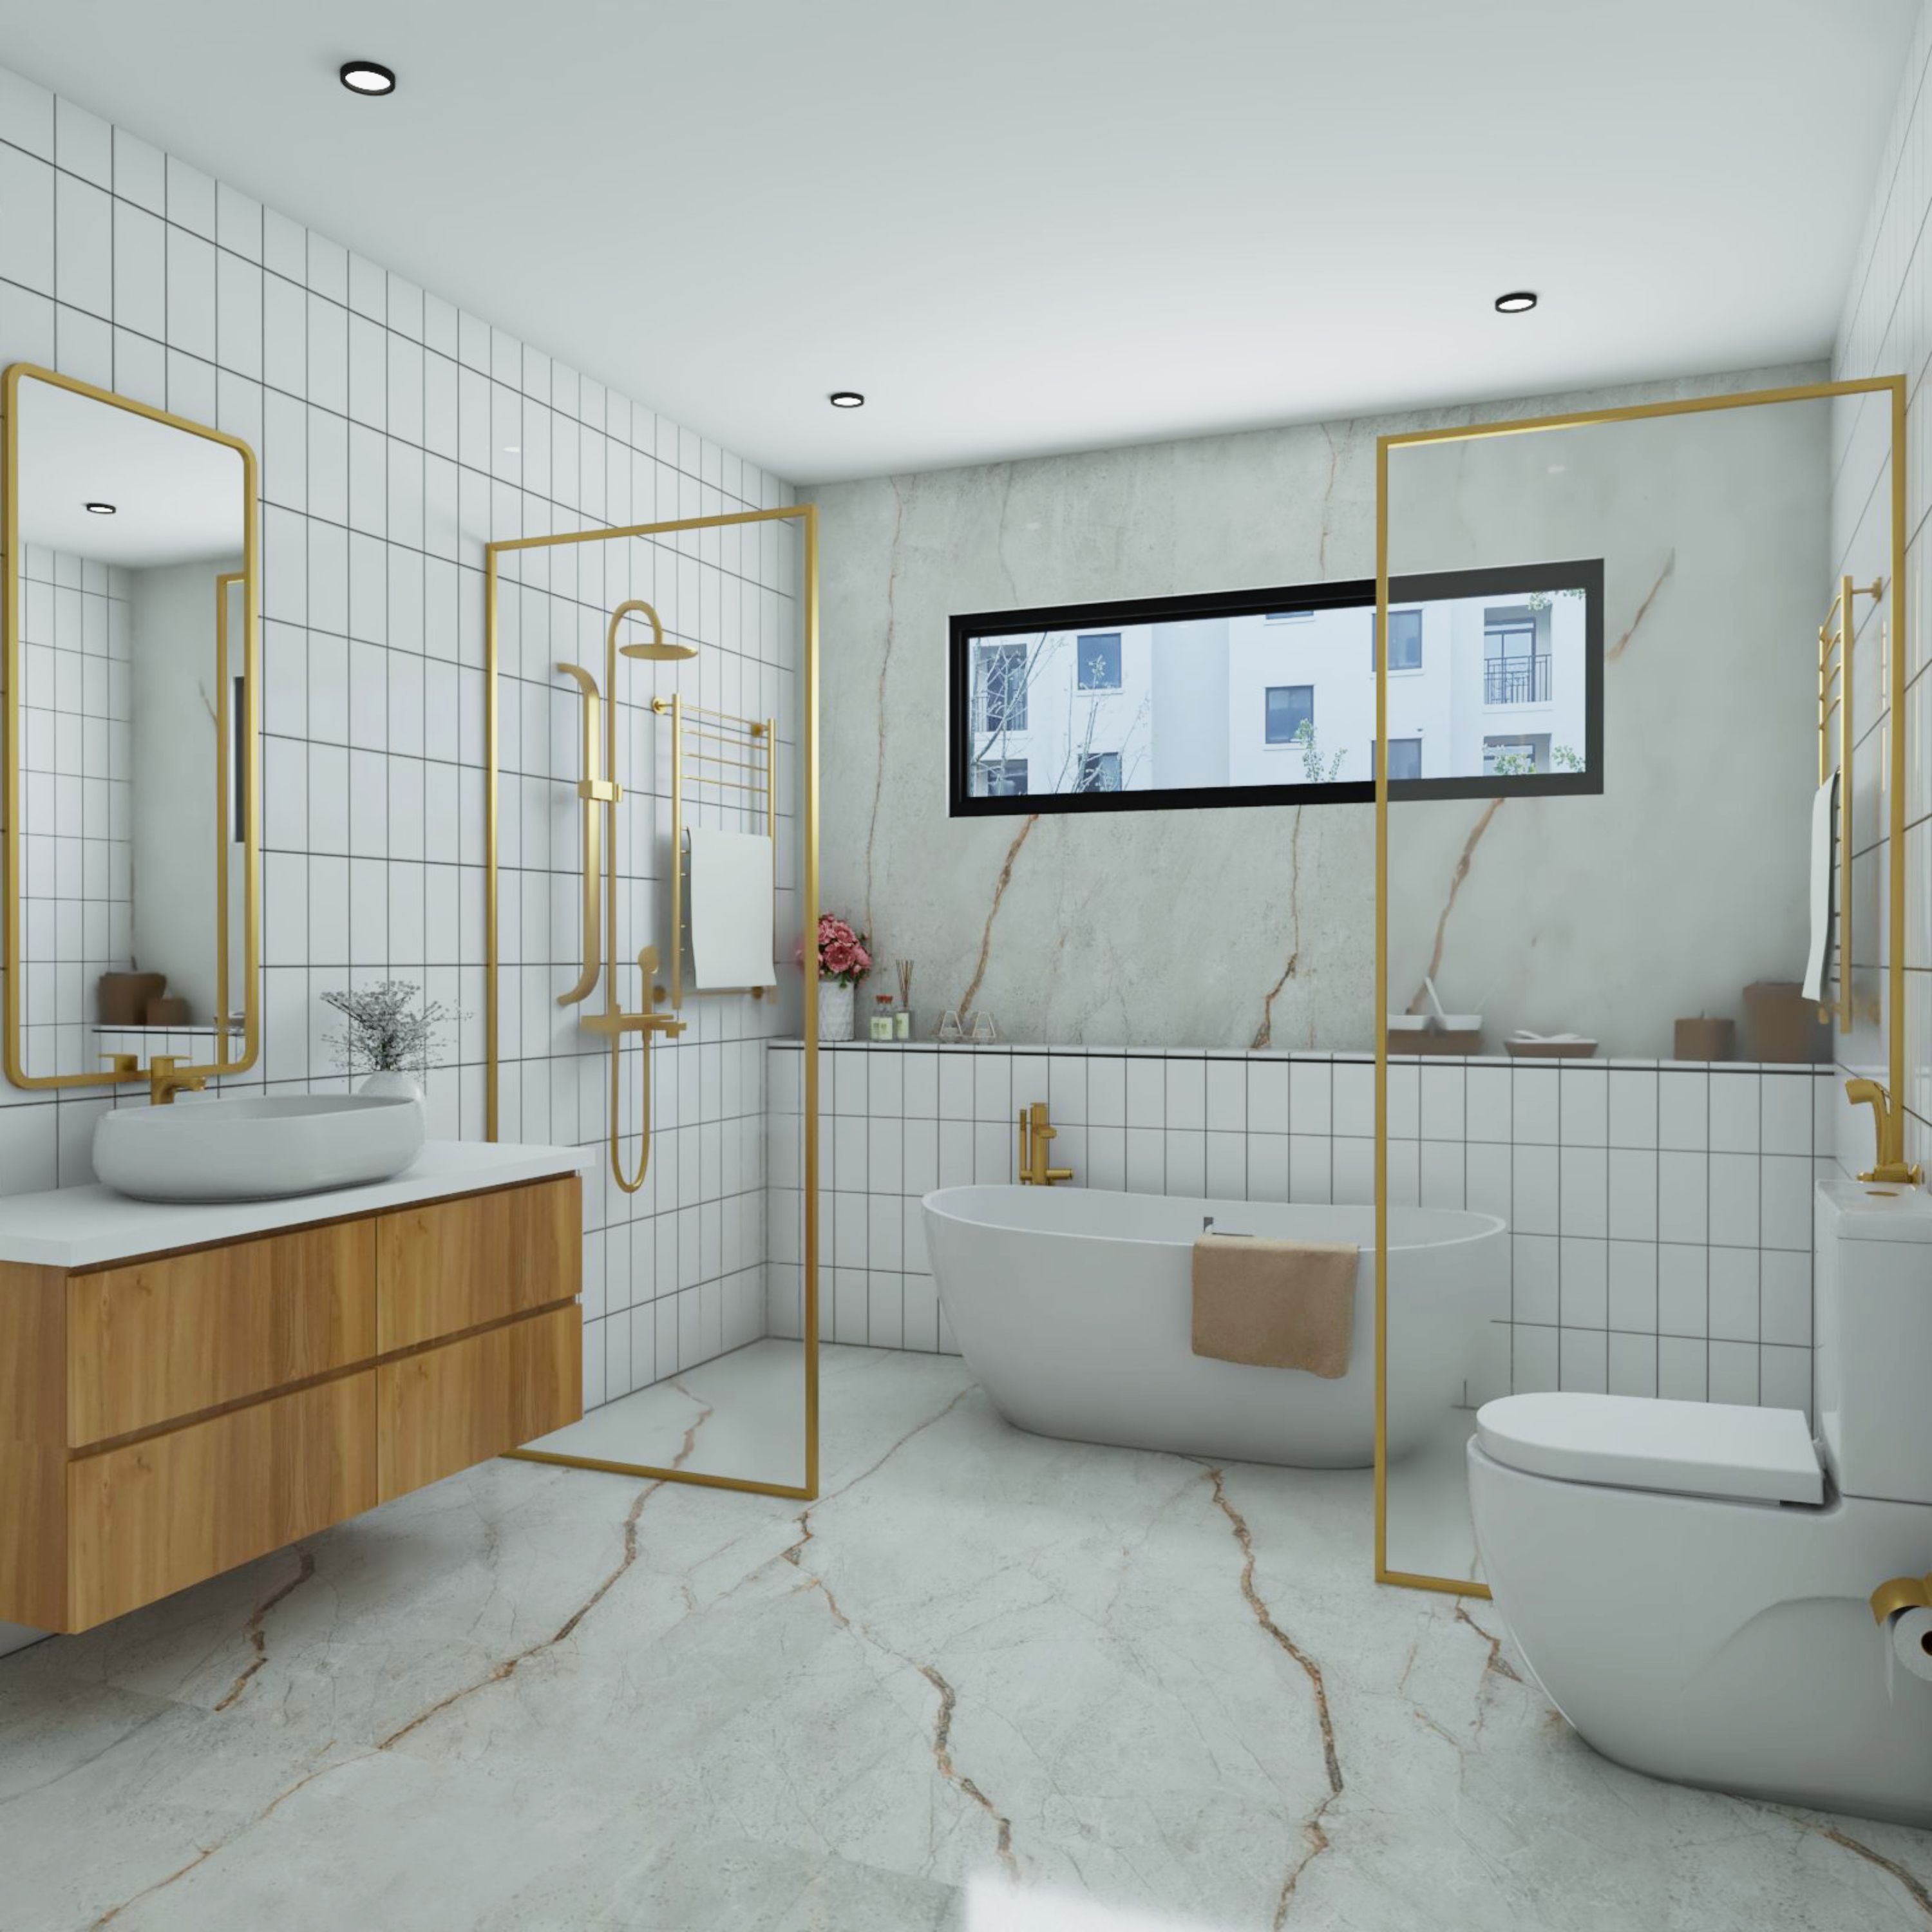 Mid-Century Modern Bathroom Design With Wall-Mounted Wooden Vanity Unit And Gold Framed Glass Partition